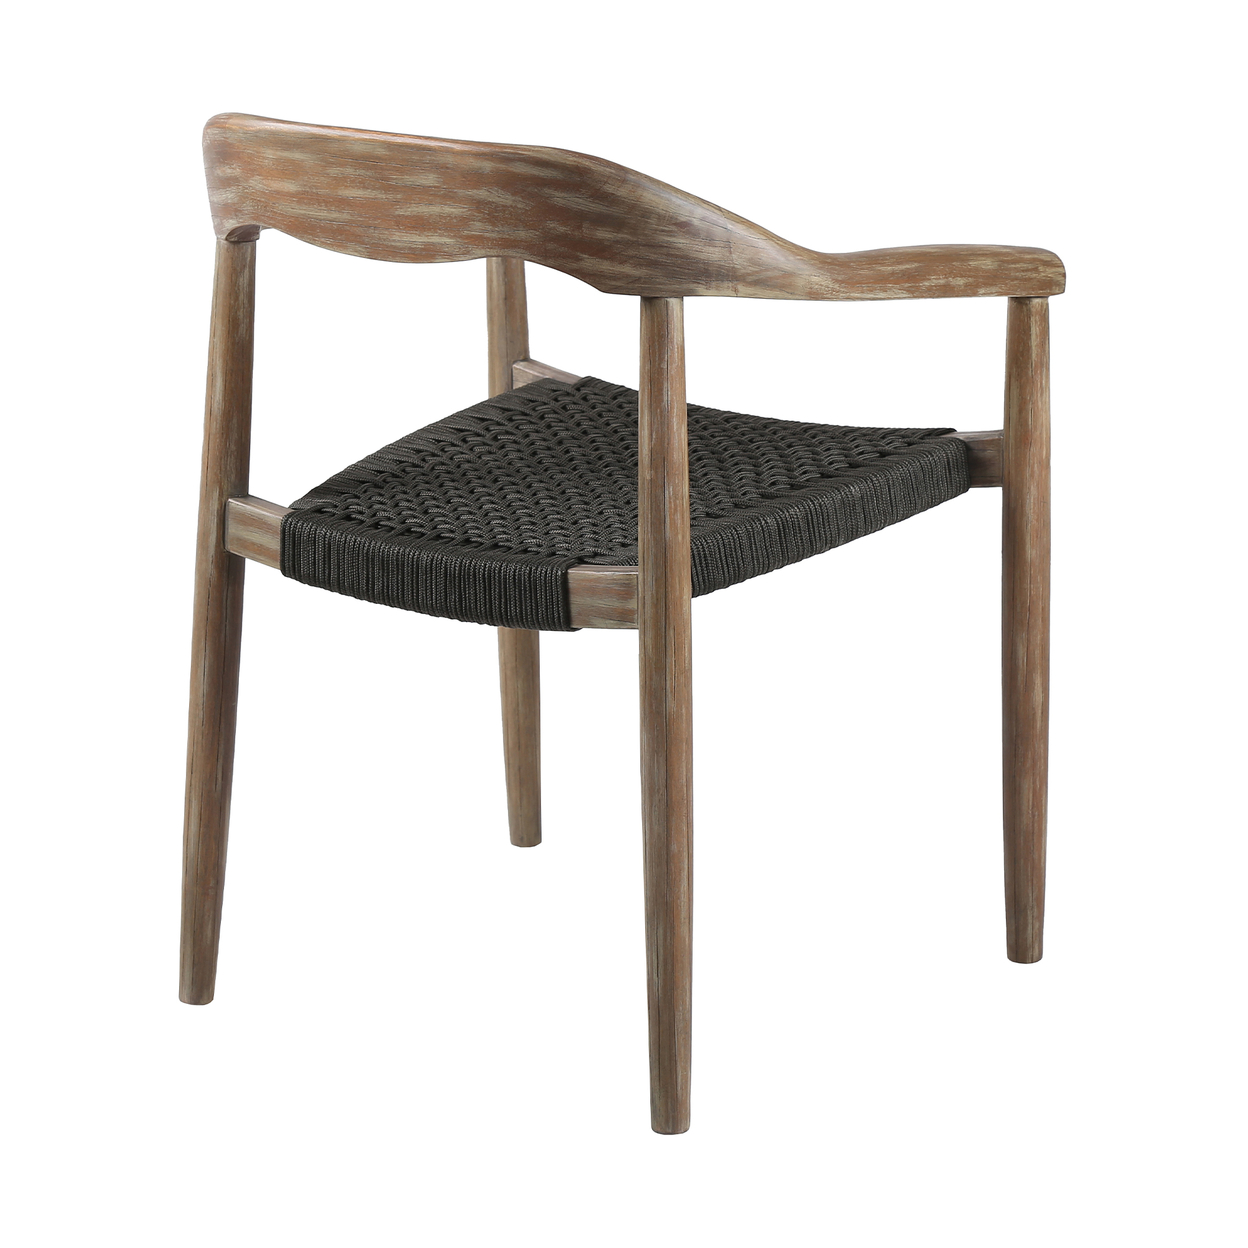 Dining Chair With Top Curved Panel Back And Woven Seat, Set Of 2, Brown- Saltoro Sherpi